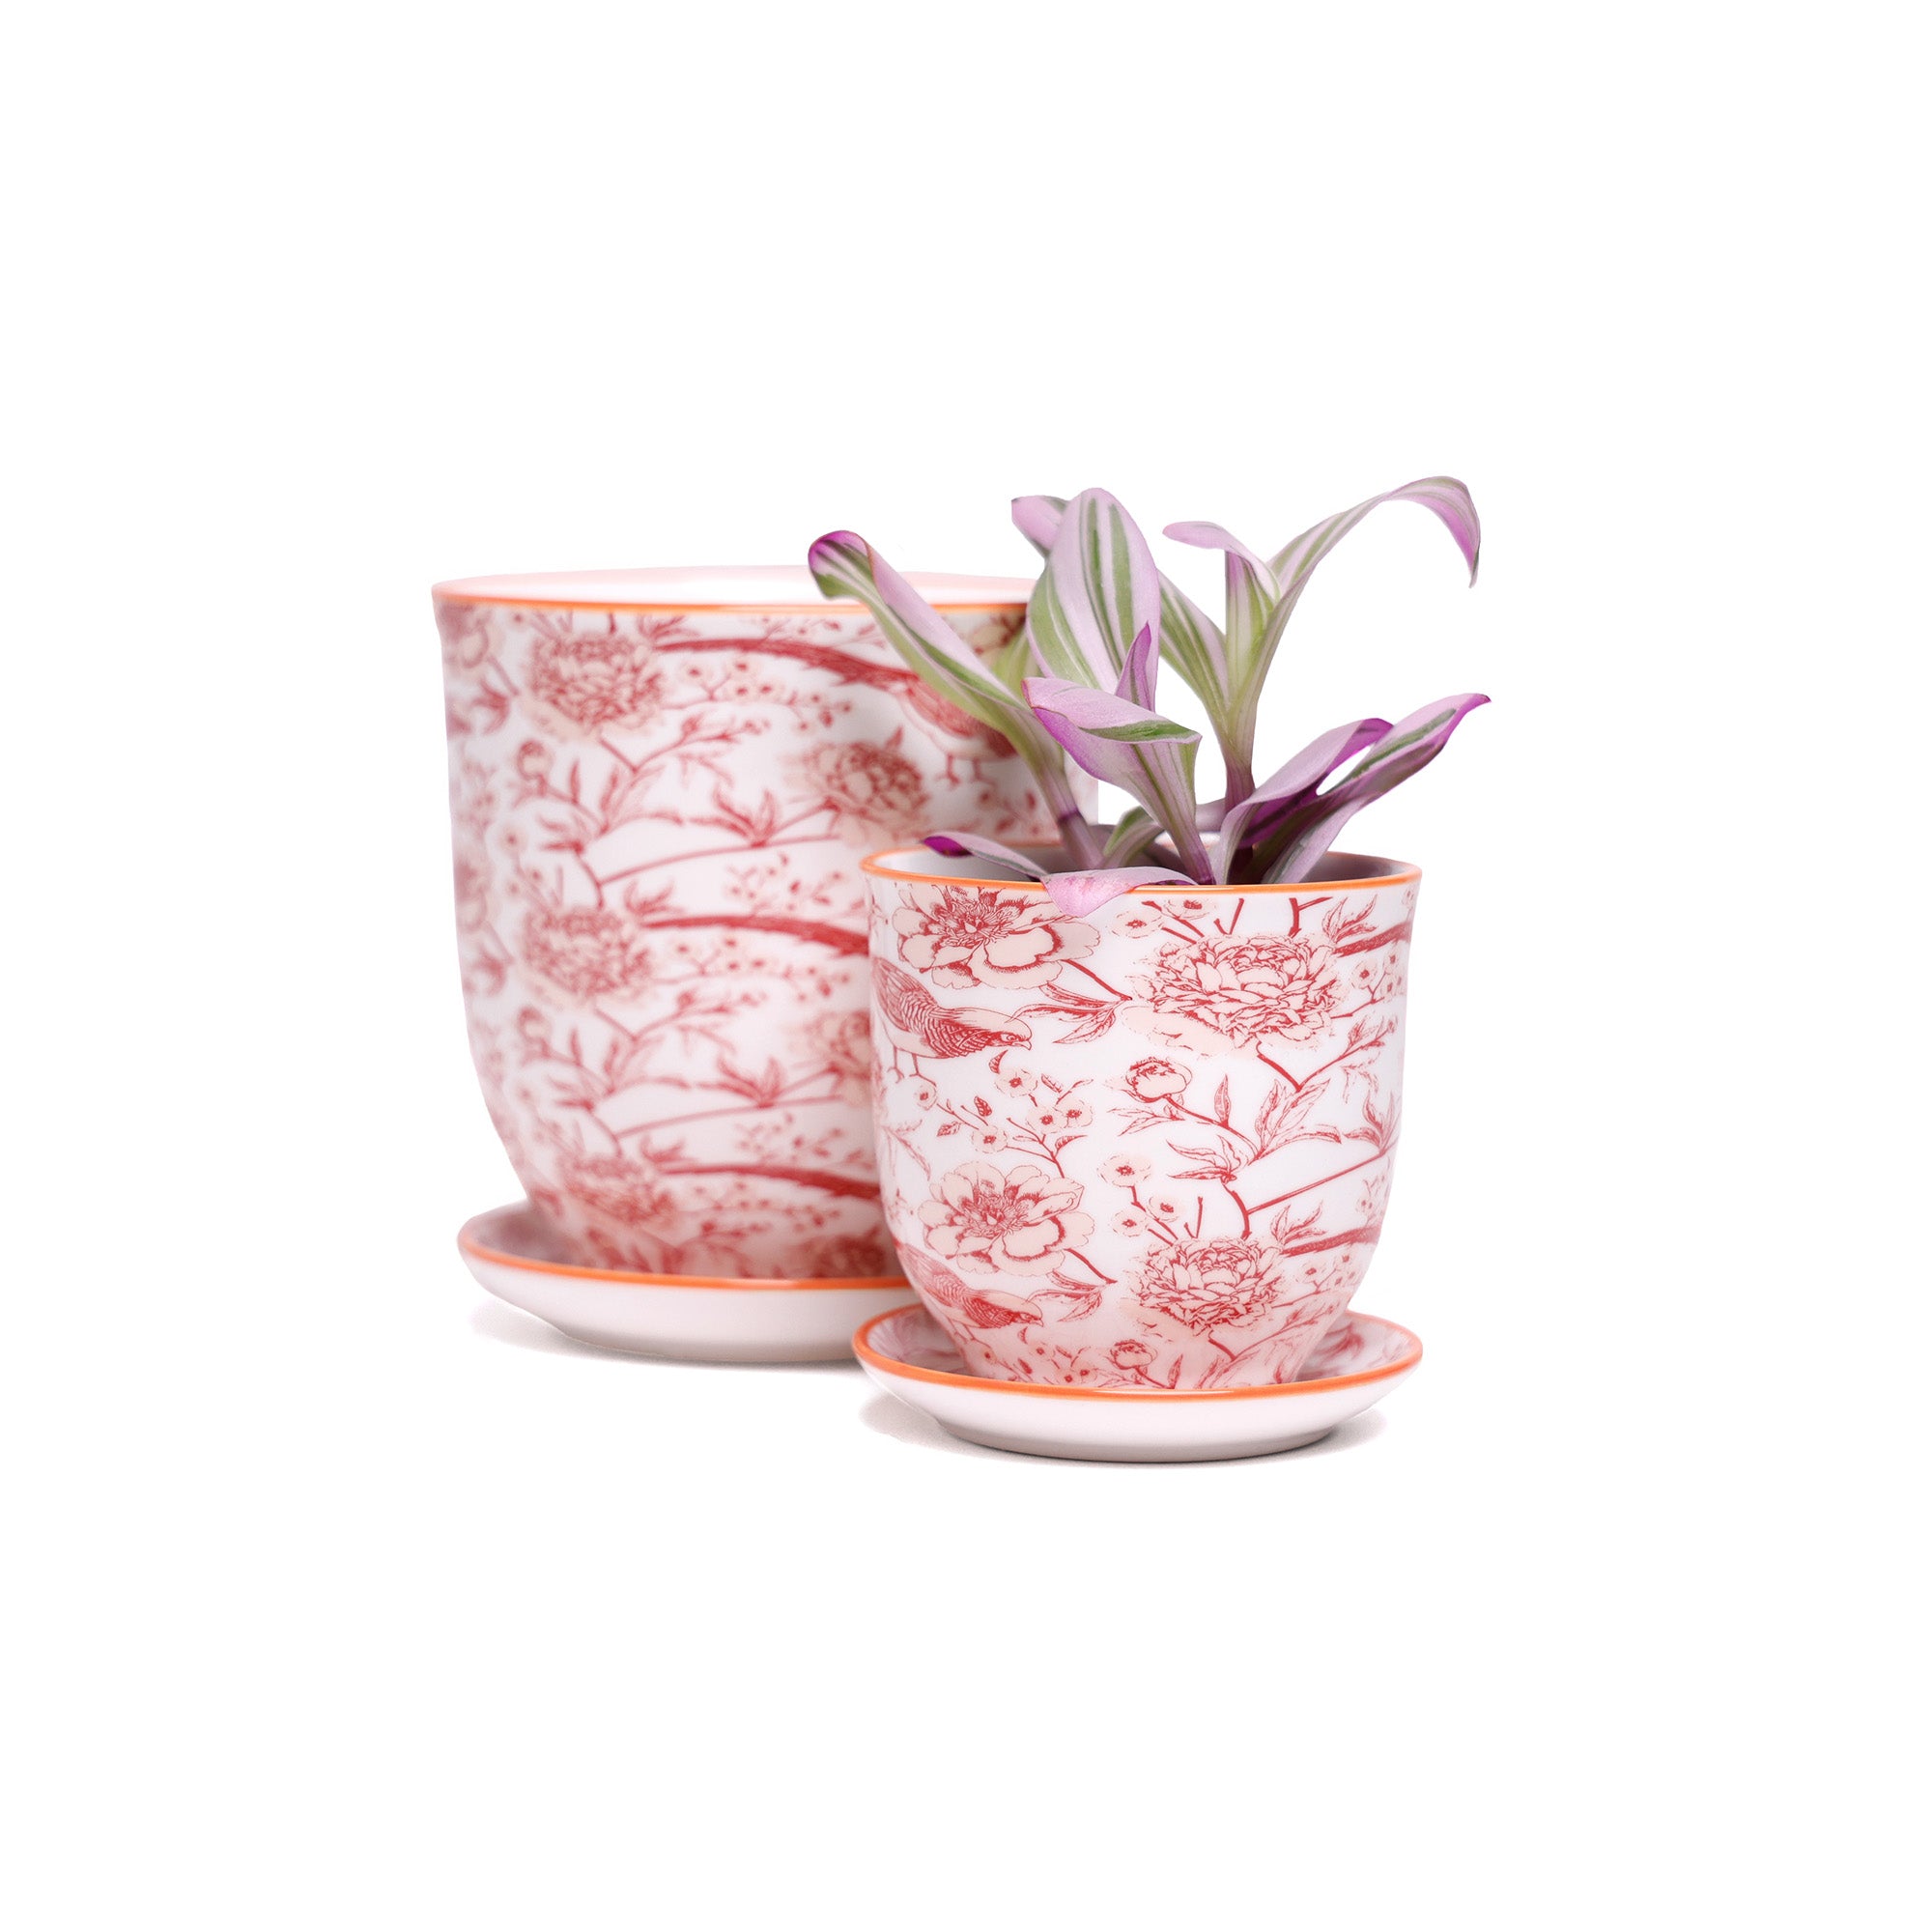 Liberte 5 Porcelain Pot And Saucer With Drainage - Chive Studio Canada